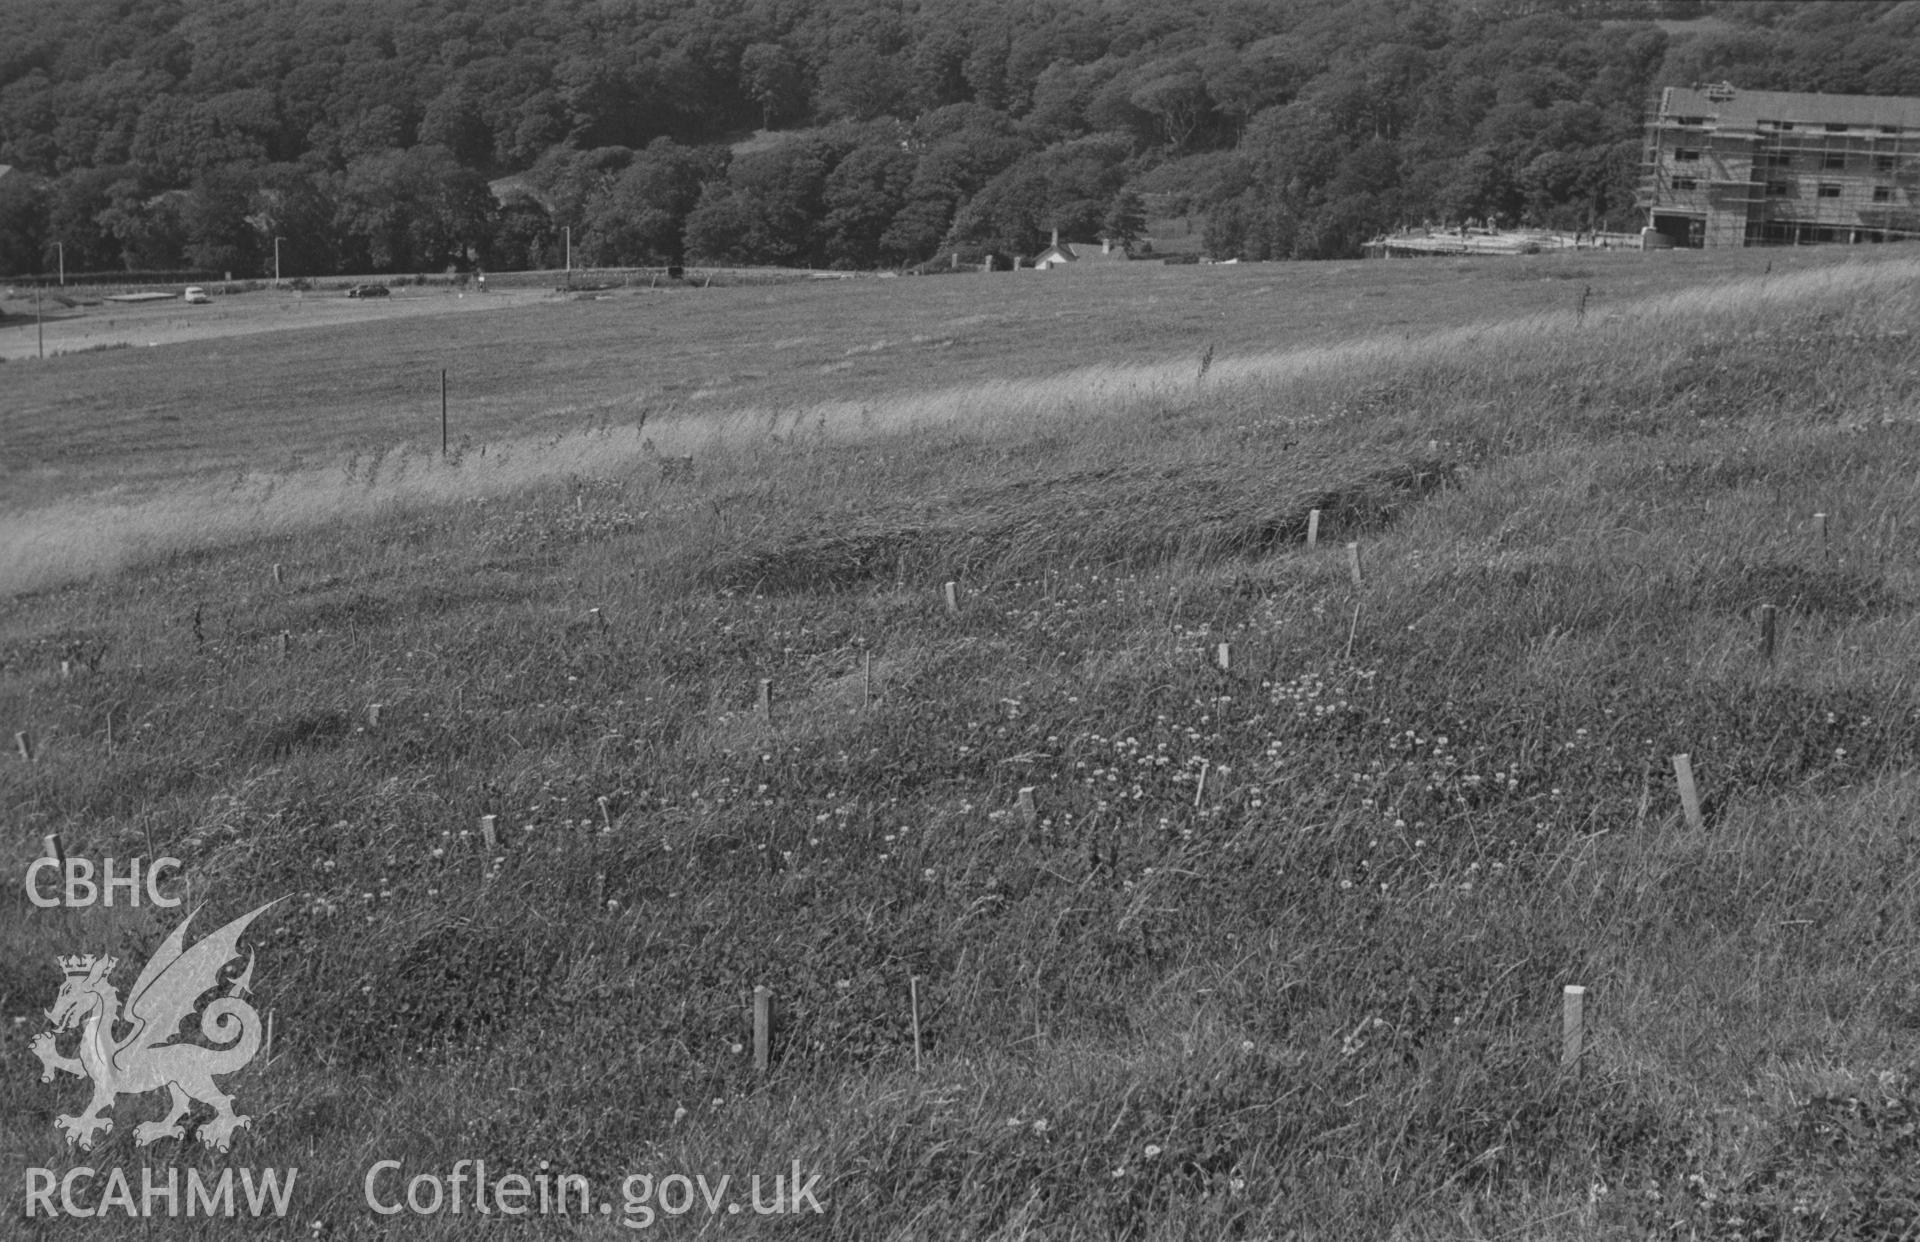 Black and White photograph showing University College Wales grass plots at Penglais, Aberystwyth. Photographed by Arthur Chater, August 1962. Grid reference: SN 597 818.